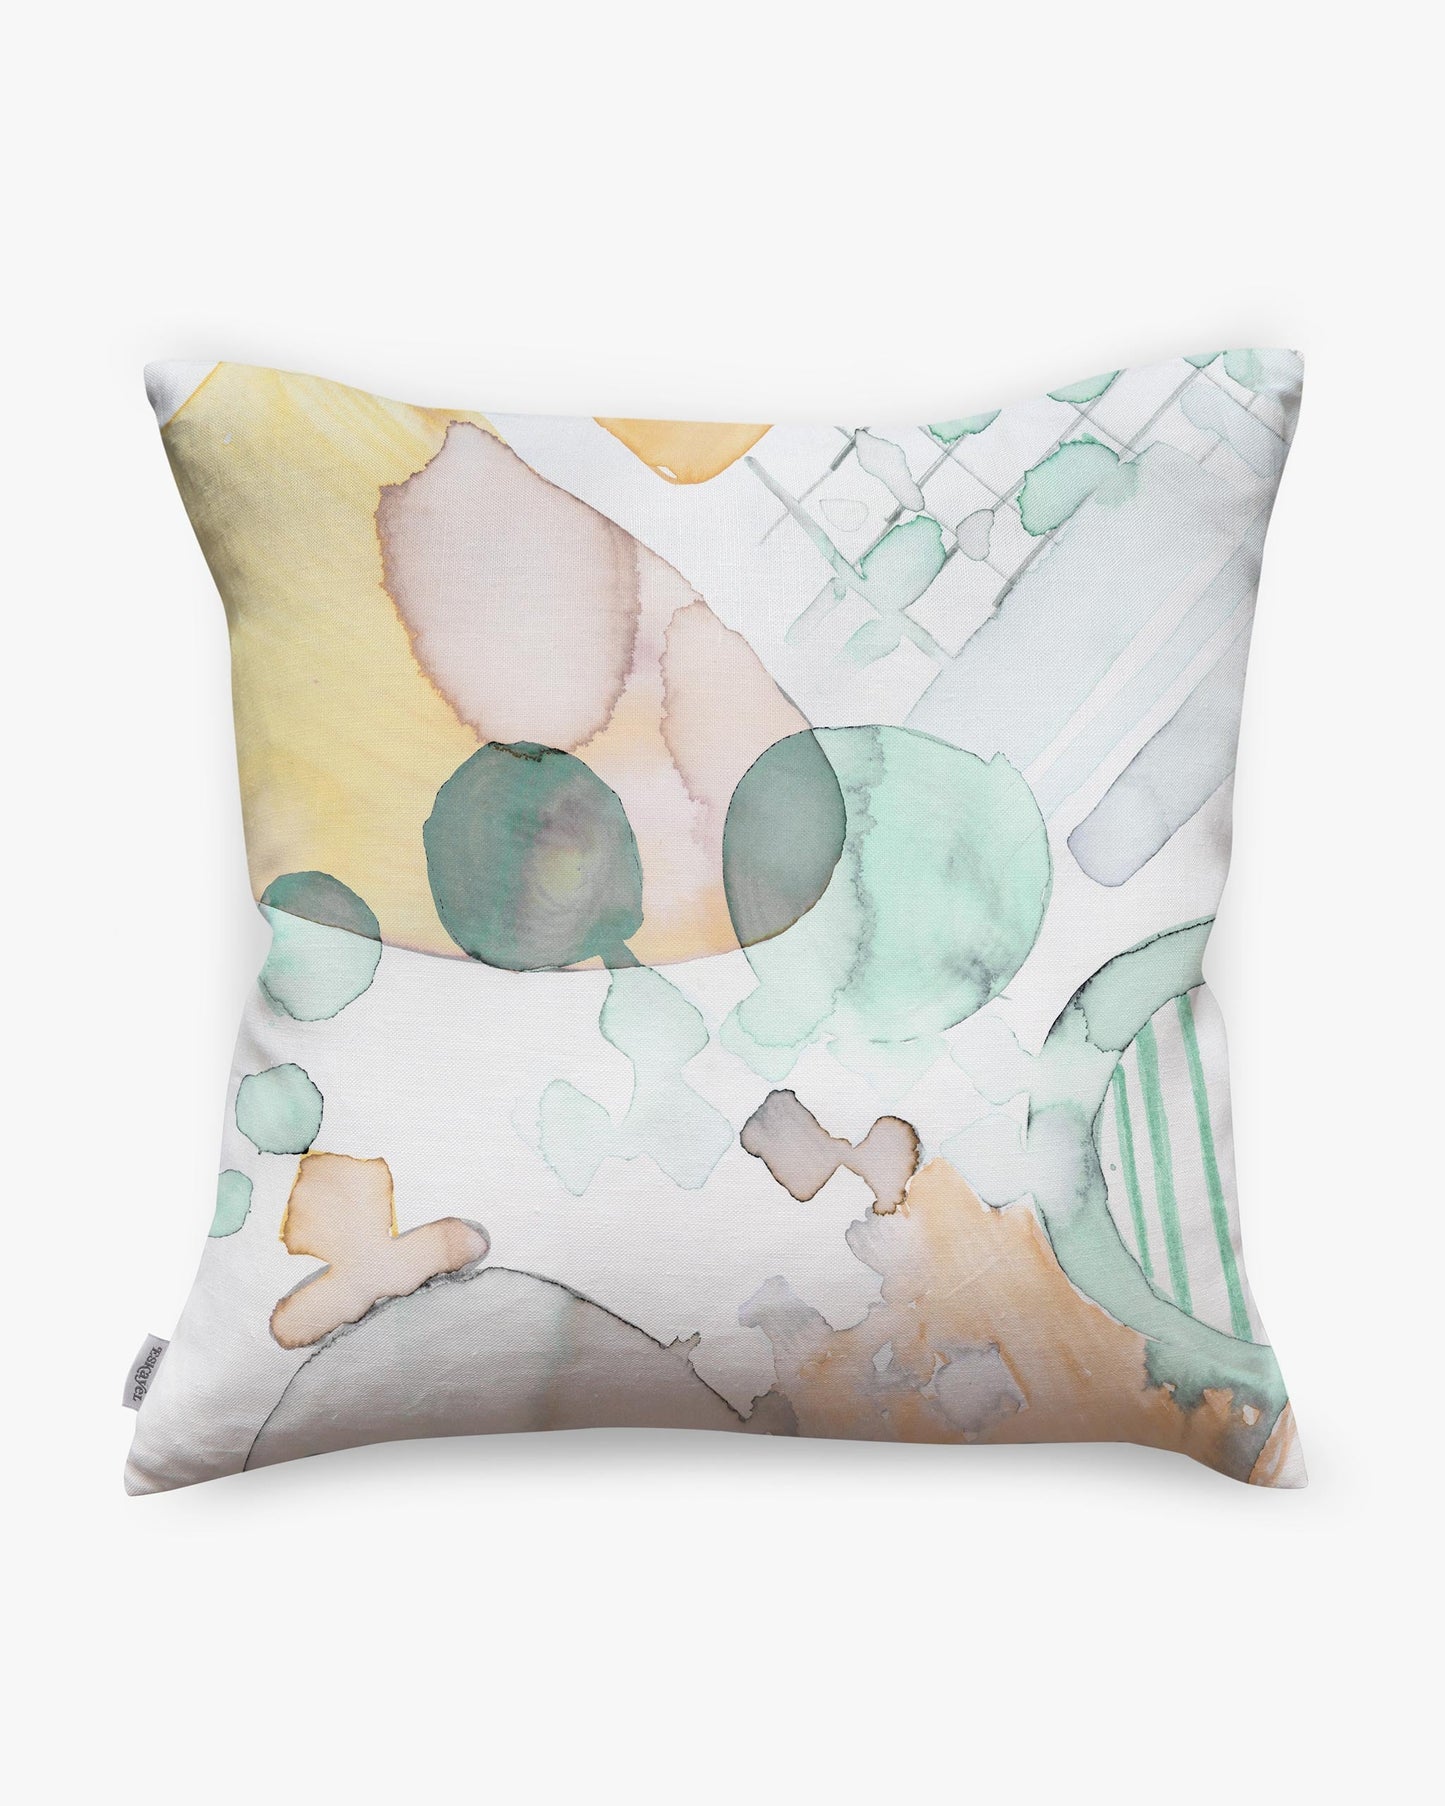 A Sea Galaxy Pillow with a watercolor painting and custom drapes on it.